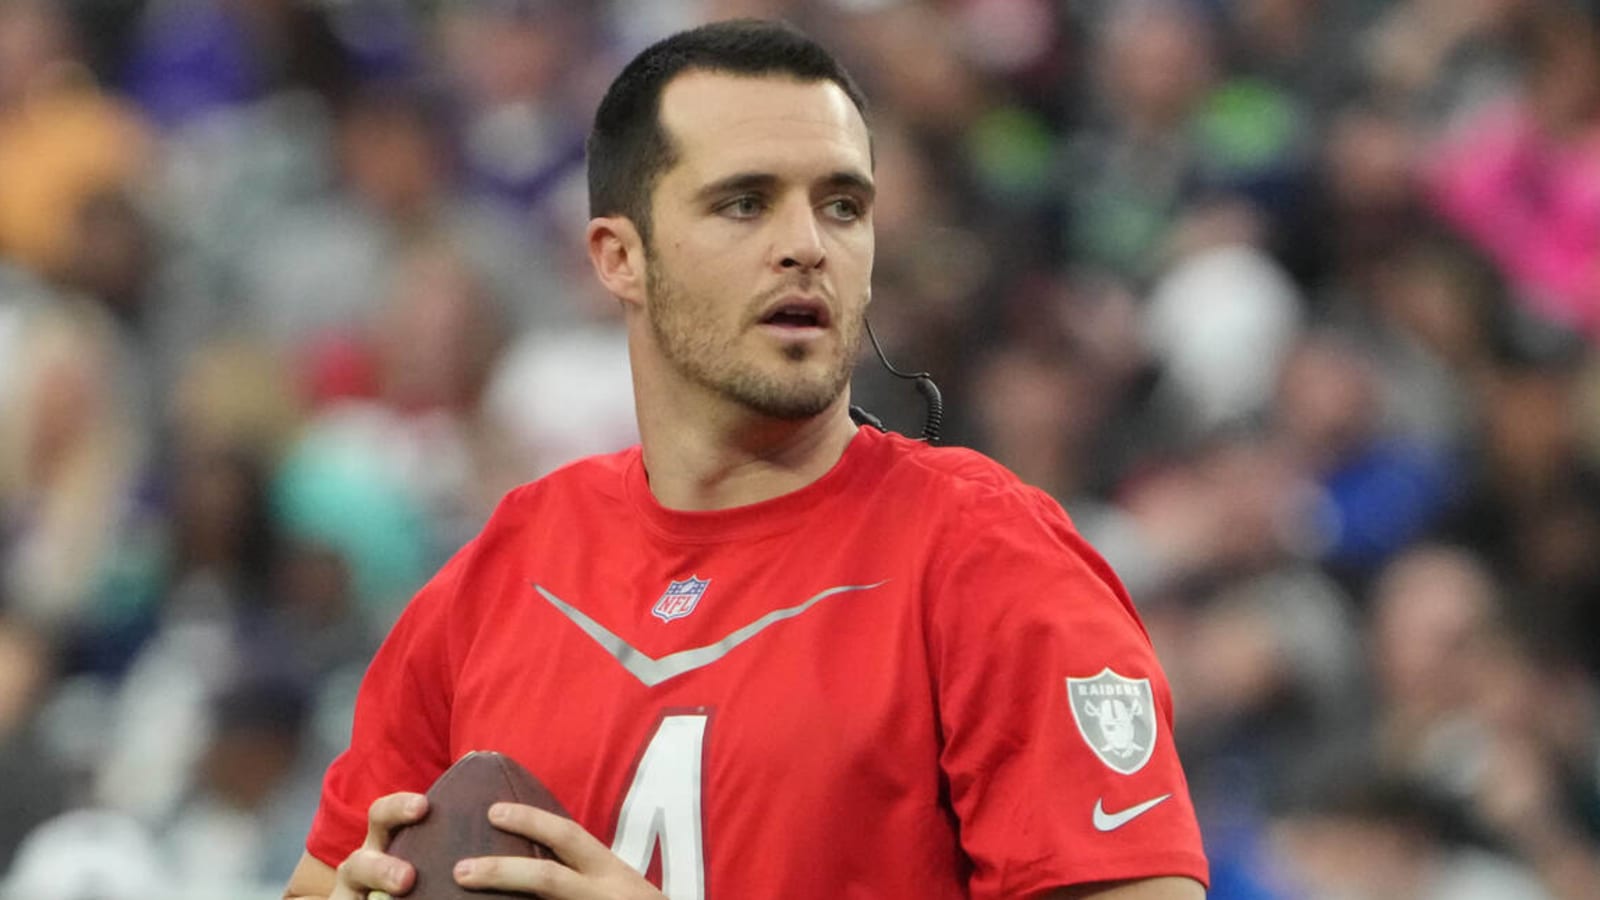 Derek Carr to meet with teams at combine